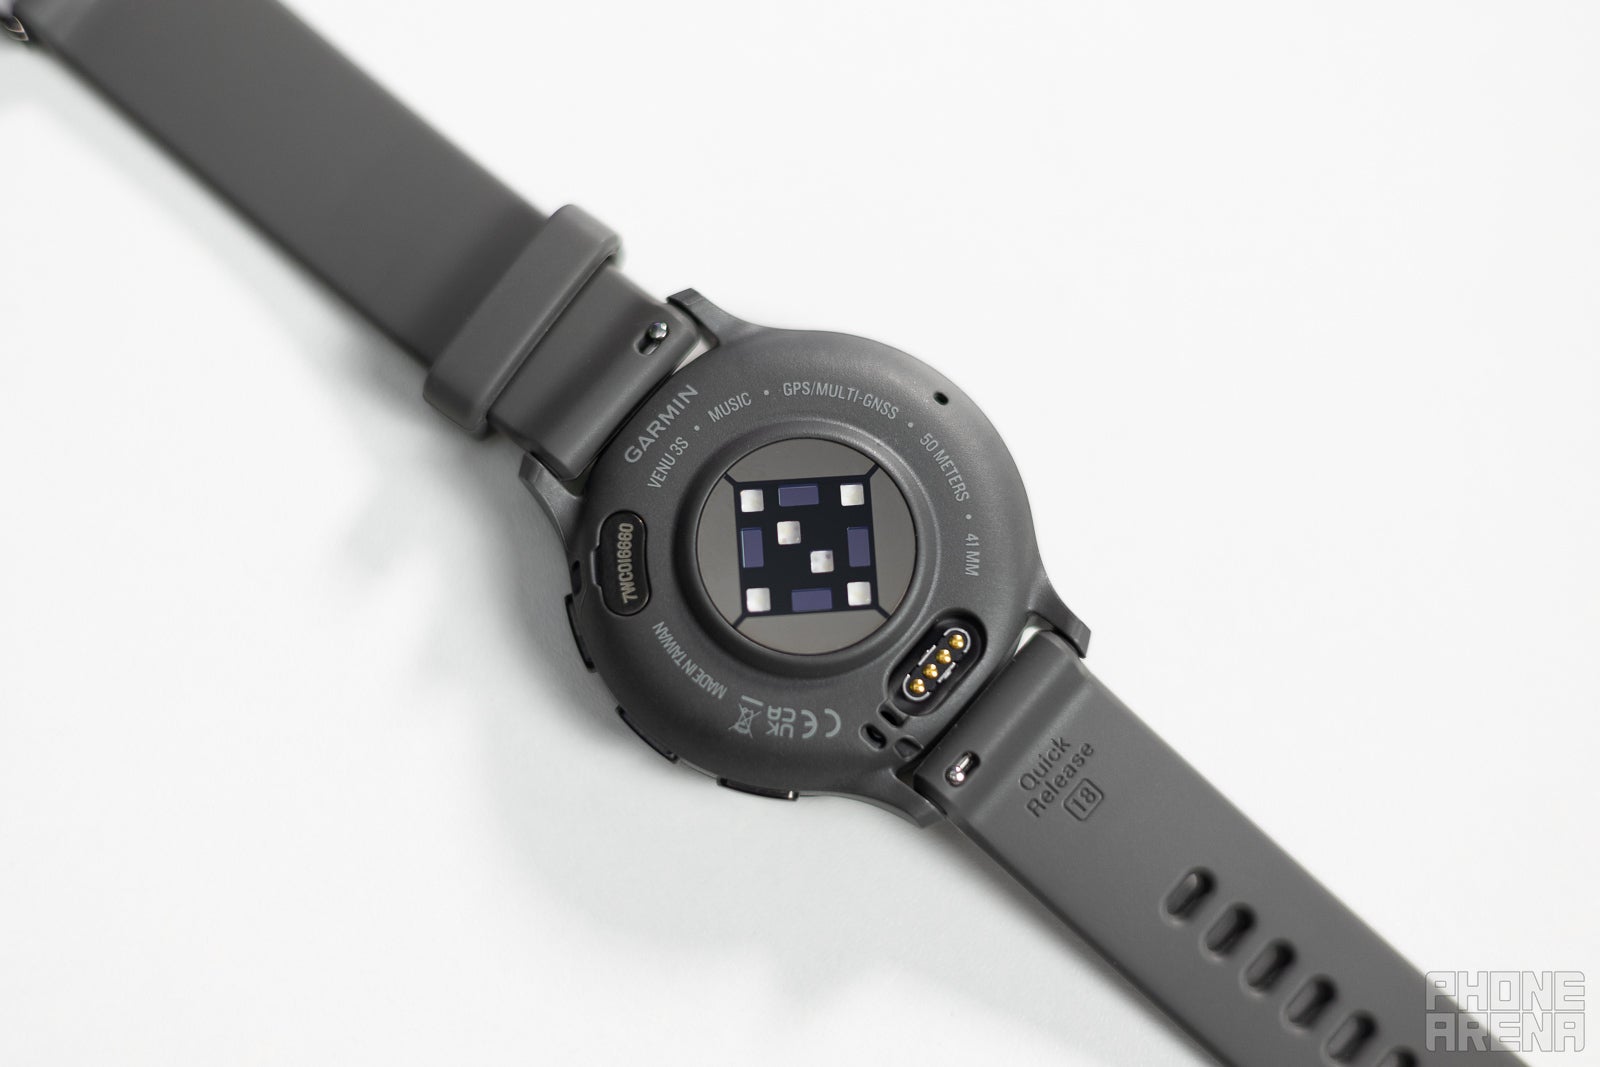 Garmin Venu 3: Review Features, Price, Availability, and More